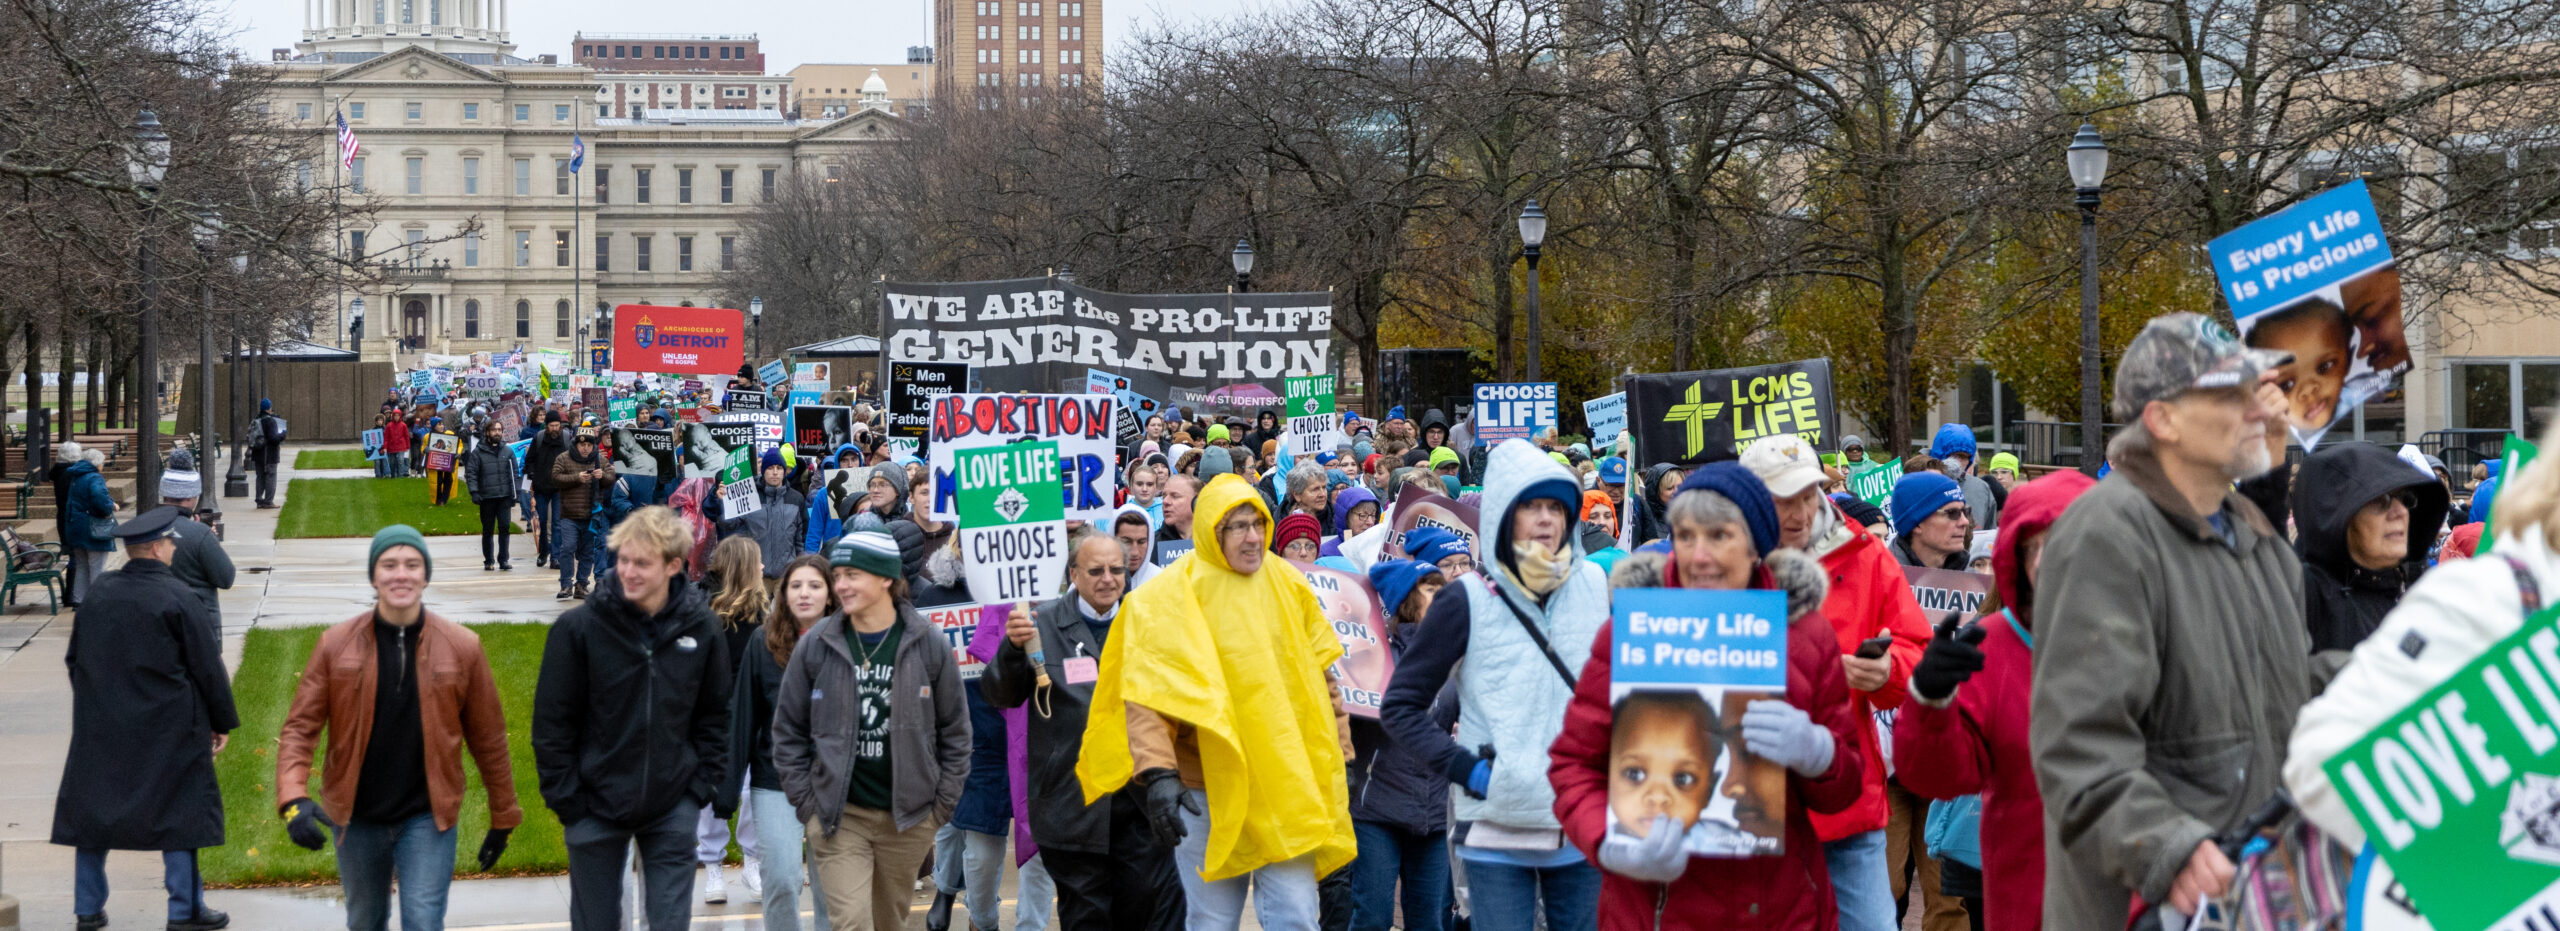 The ProLife Generation at the Michigan March for Life Michigan